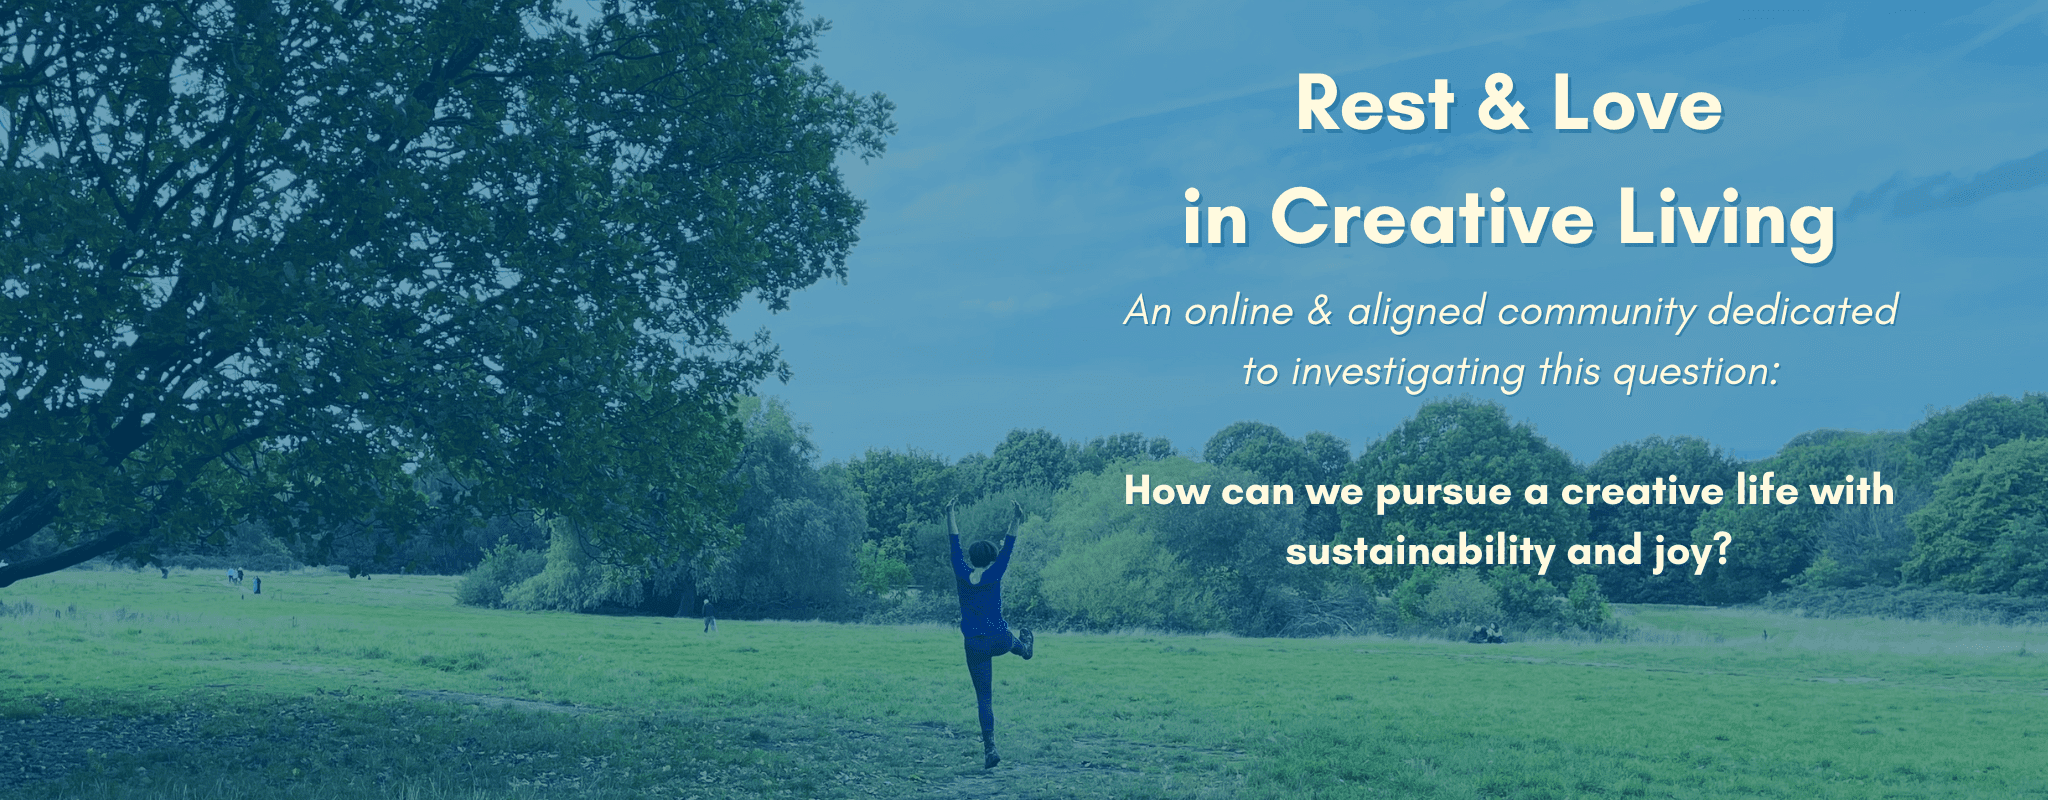 Rest & Love in Creative Living. An online & aligned community dedicated to investigating this question: How can we pursue a creative life with sustainability & joy?